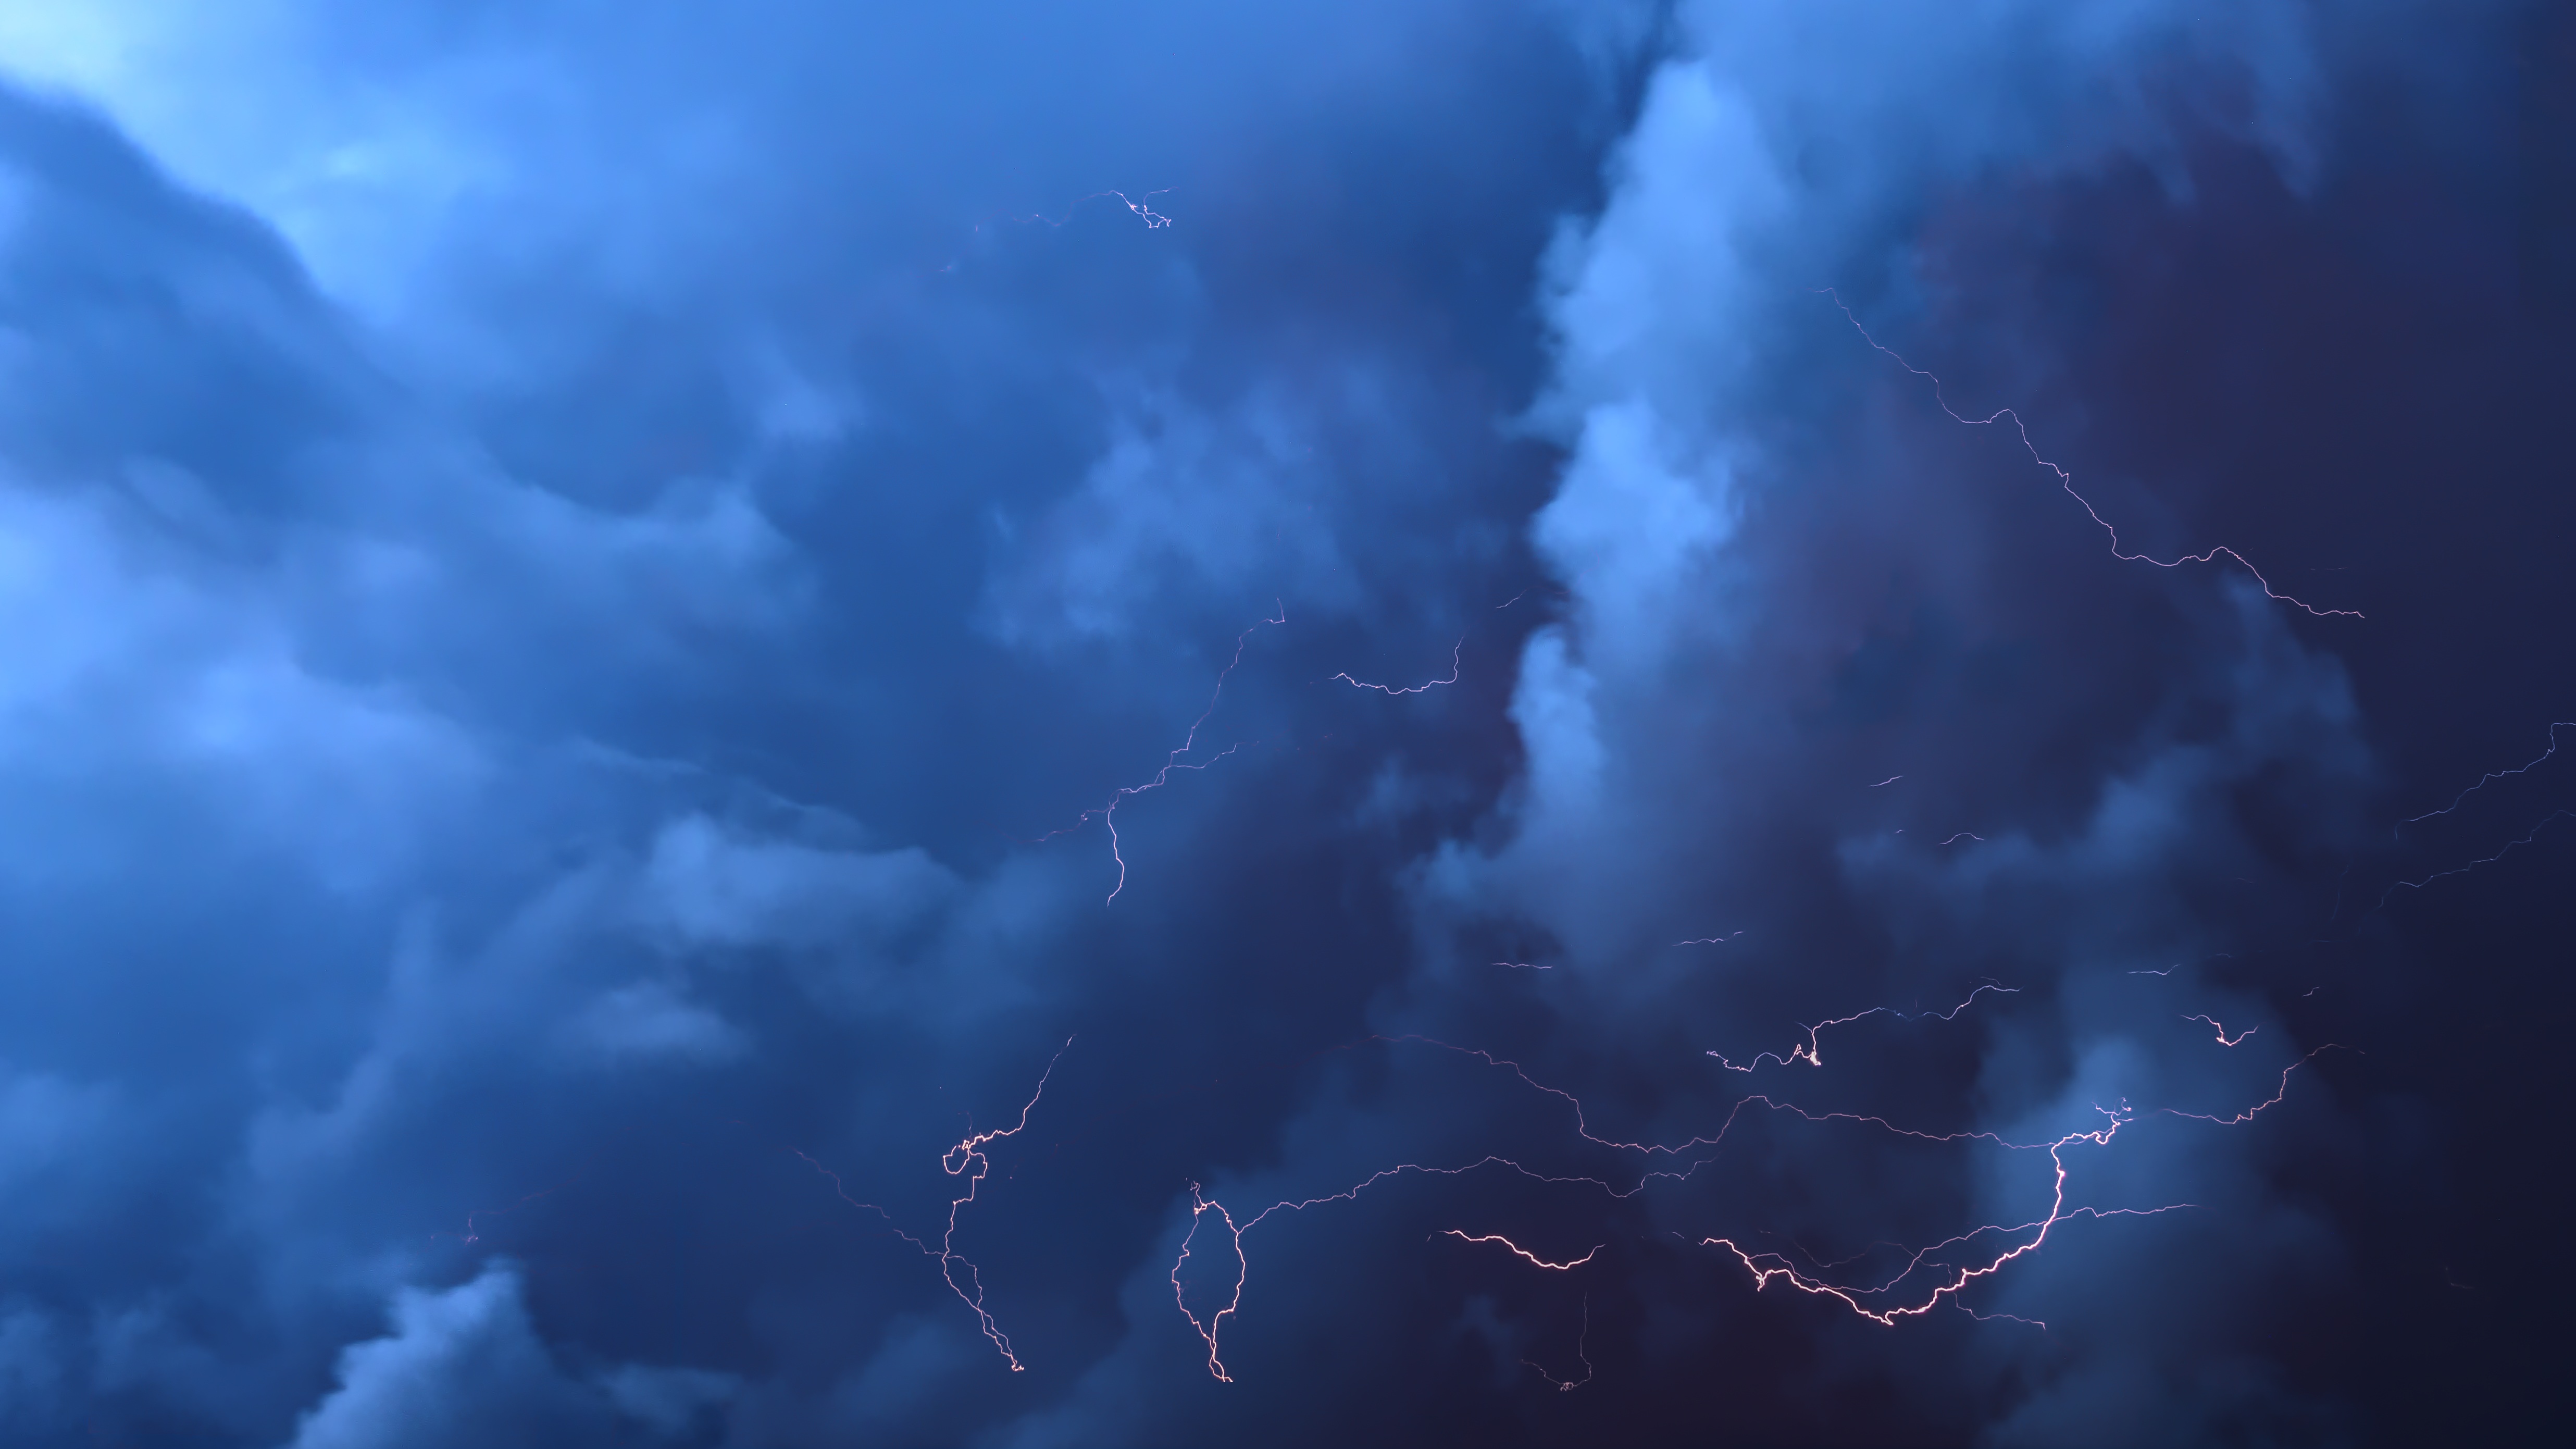 Cool HD Wallpaper storm, mainly cloudy, thunderstorm, clouds